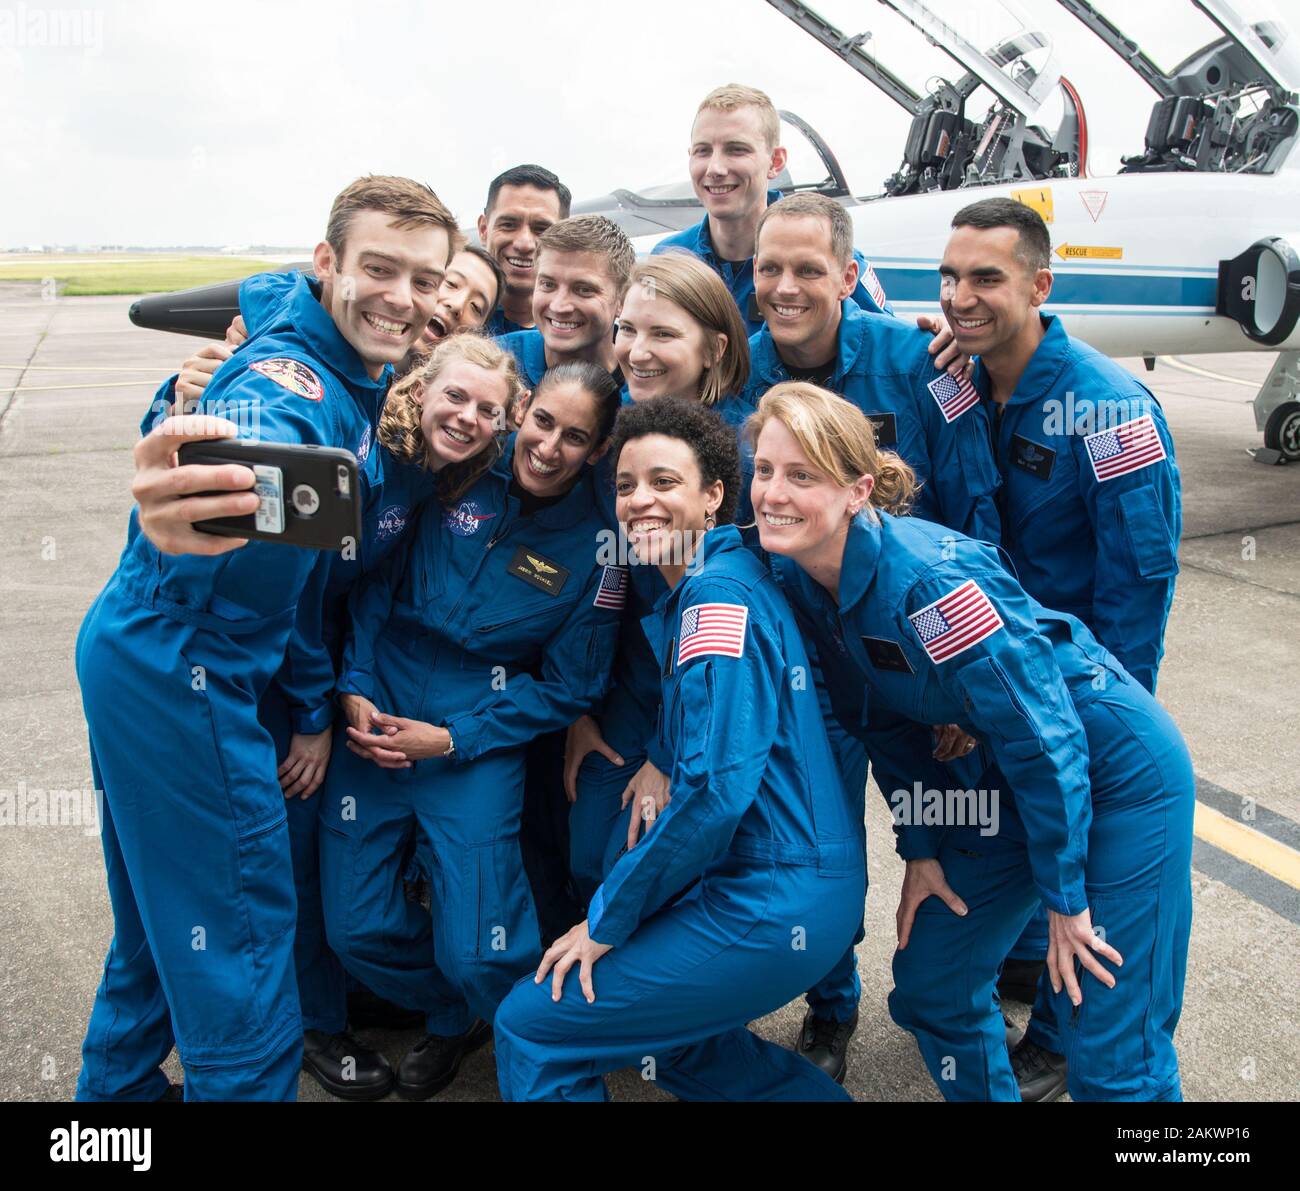 NASA's 2017 Astronaut Candidate Class stopped for a group photo while getting fitted for flight suits at Ellington Airport near NASA's Johnson Space Center in Houston, Texas on June 6, 2017. NASA is honoring the first class of astronaut candidates to graduate under the Artemis program on January 10, 2019, at the agency's Johnson Space Center in Houston. After completing more than two years of basic training, these candidates will become eligible for spaceflight, including assignments to the International Space Station, Artemis missions to the Moon, and, ultimately, missions to Mars. Stock Photo